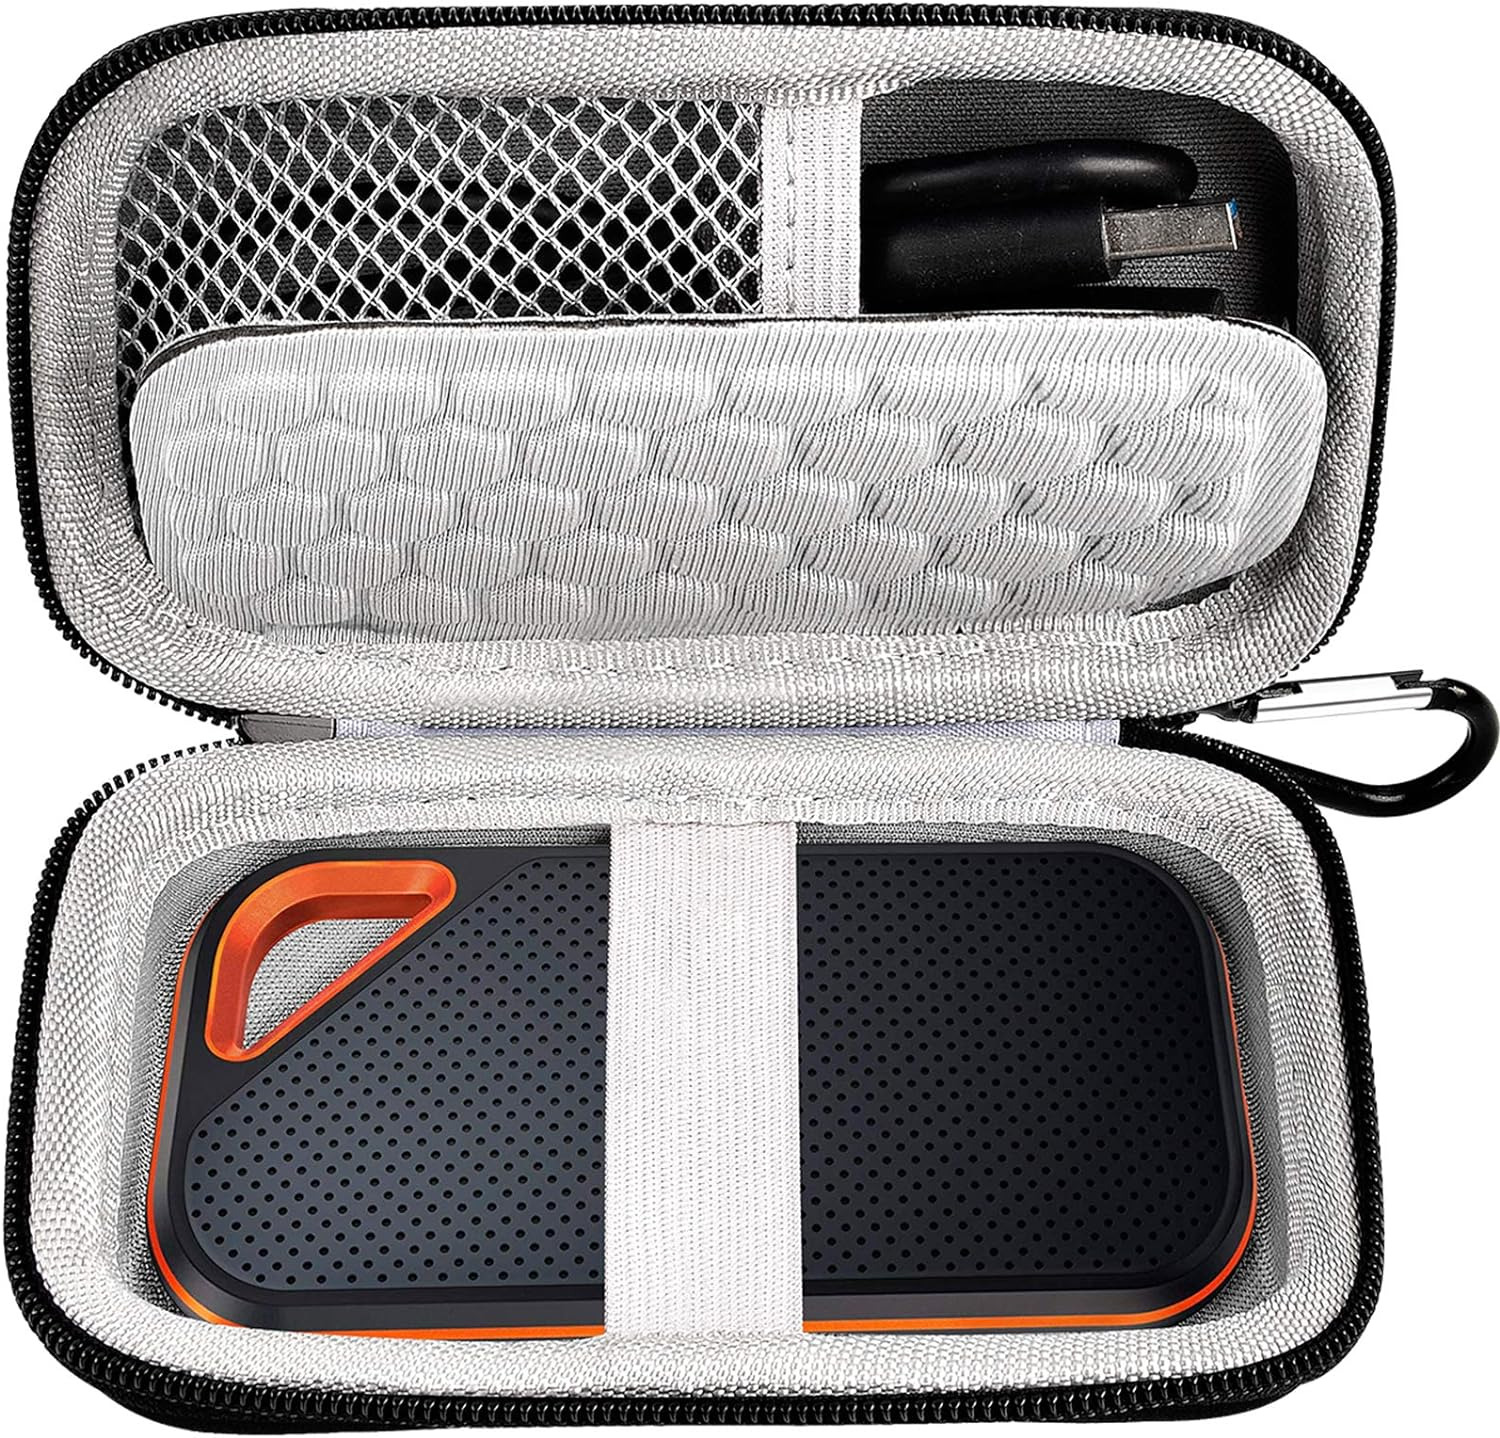 Hard Case Compatible with Sandisk Extreme Pro/For Sandisk 500GB 1TB 2TB 4TB Port